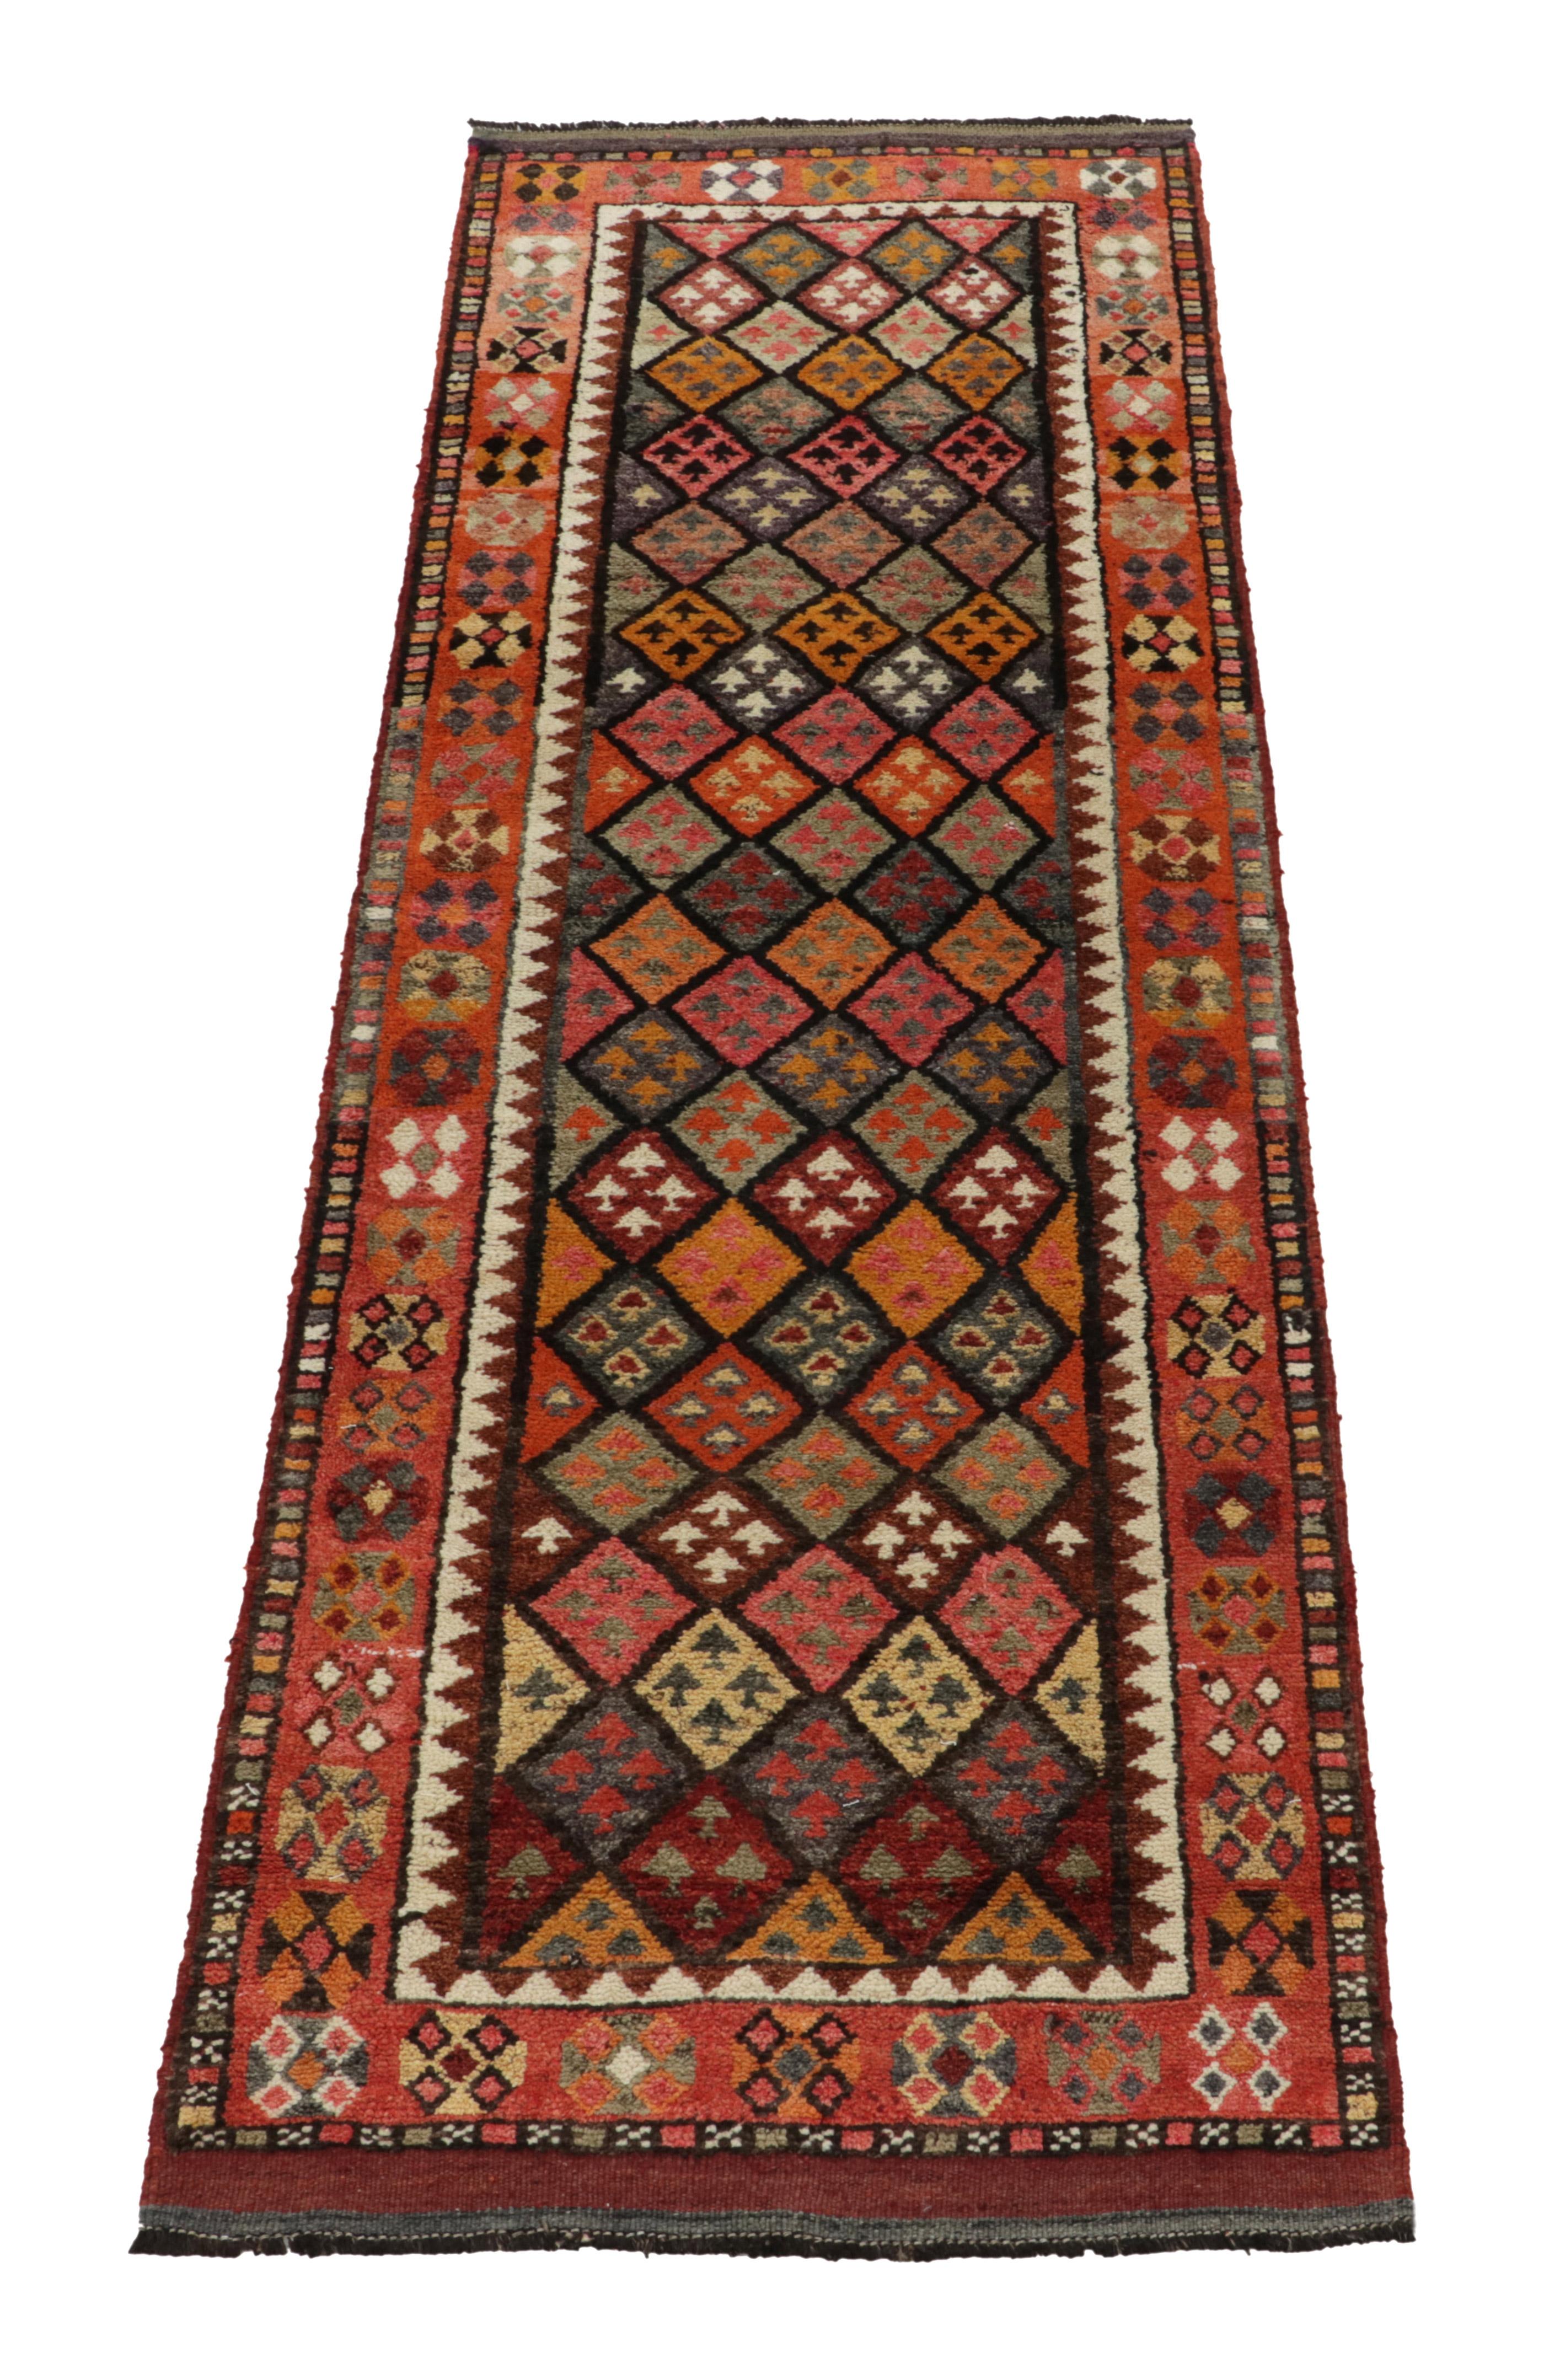 Hand-knotted in wool, a 3x9 runner from Rug & Kilim’s latest curation of bold, rare tribal pieces. 

Originating from Turkey circa 1950-1960, the sketch enjoys diamond patterns on the field outlined by traditional motifs in rich tones of warm red,